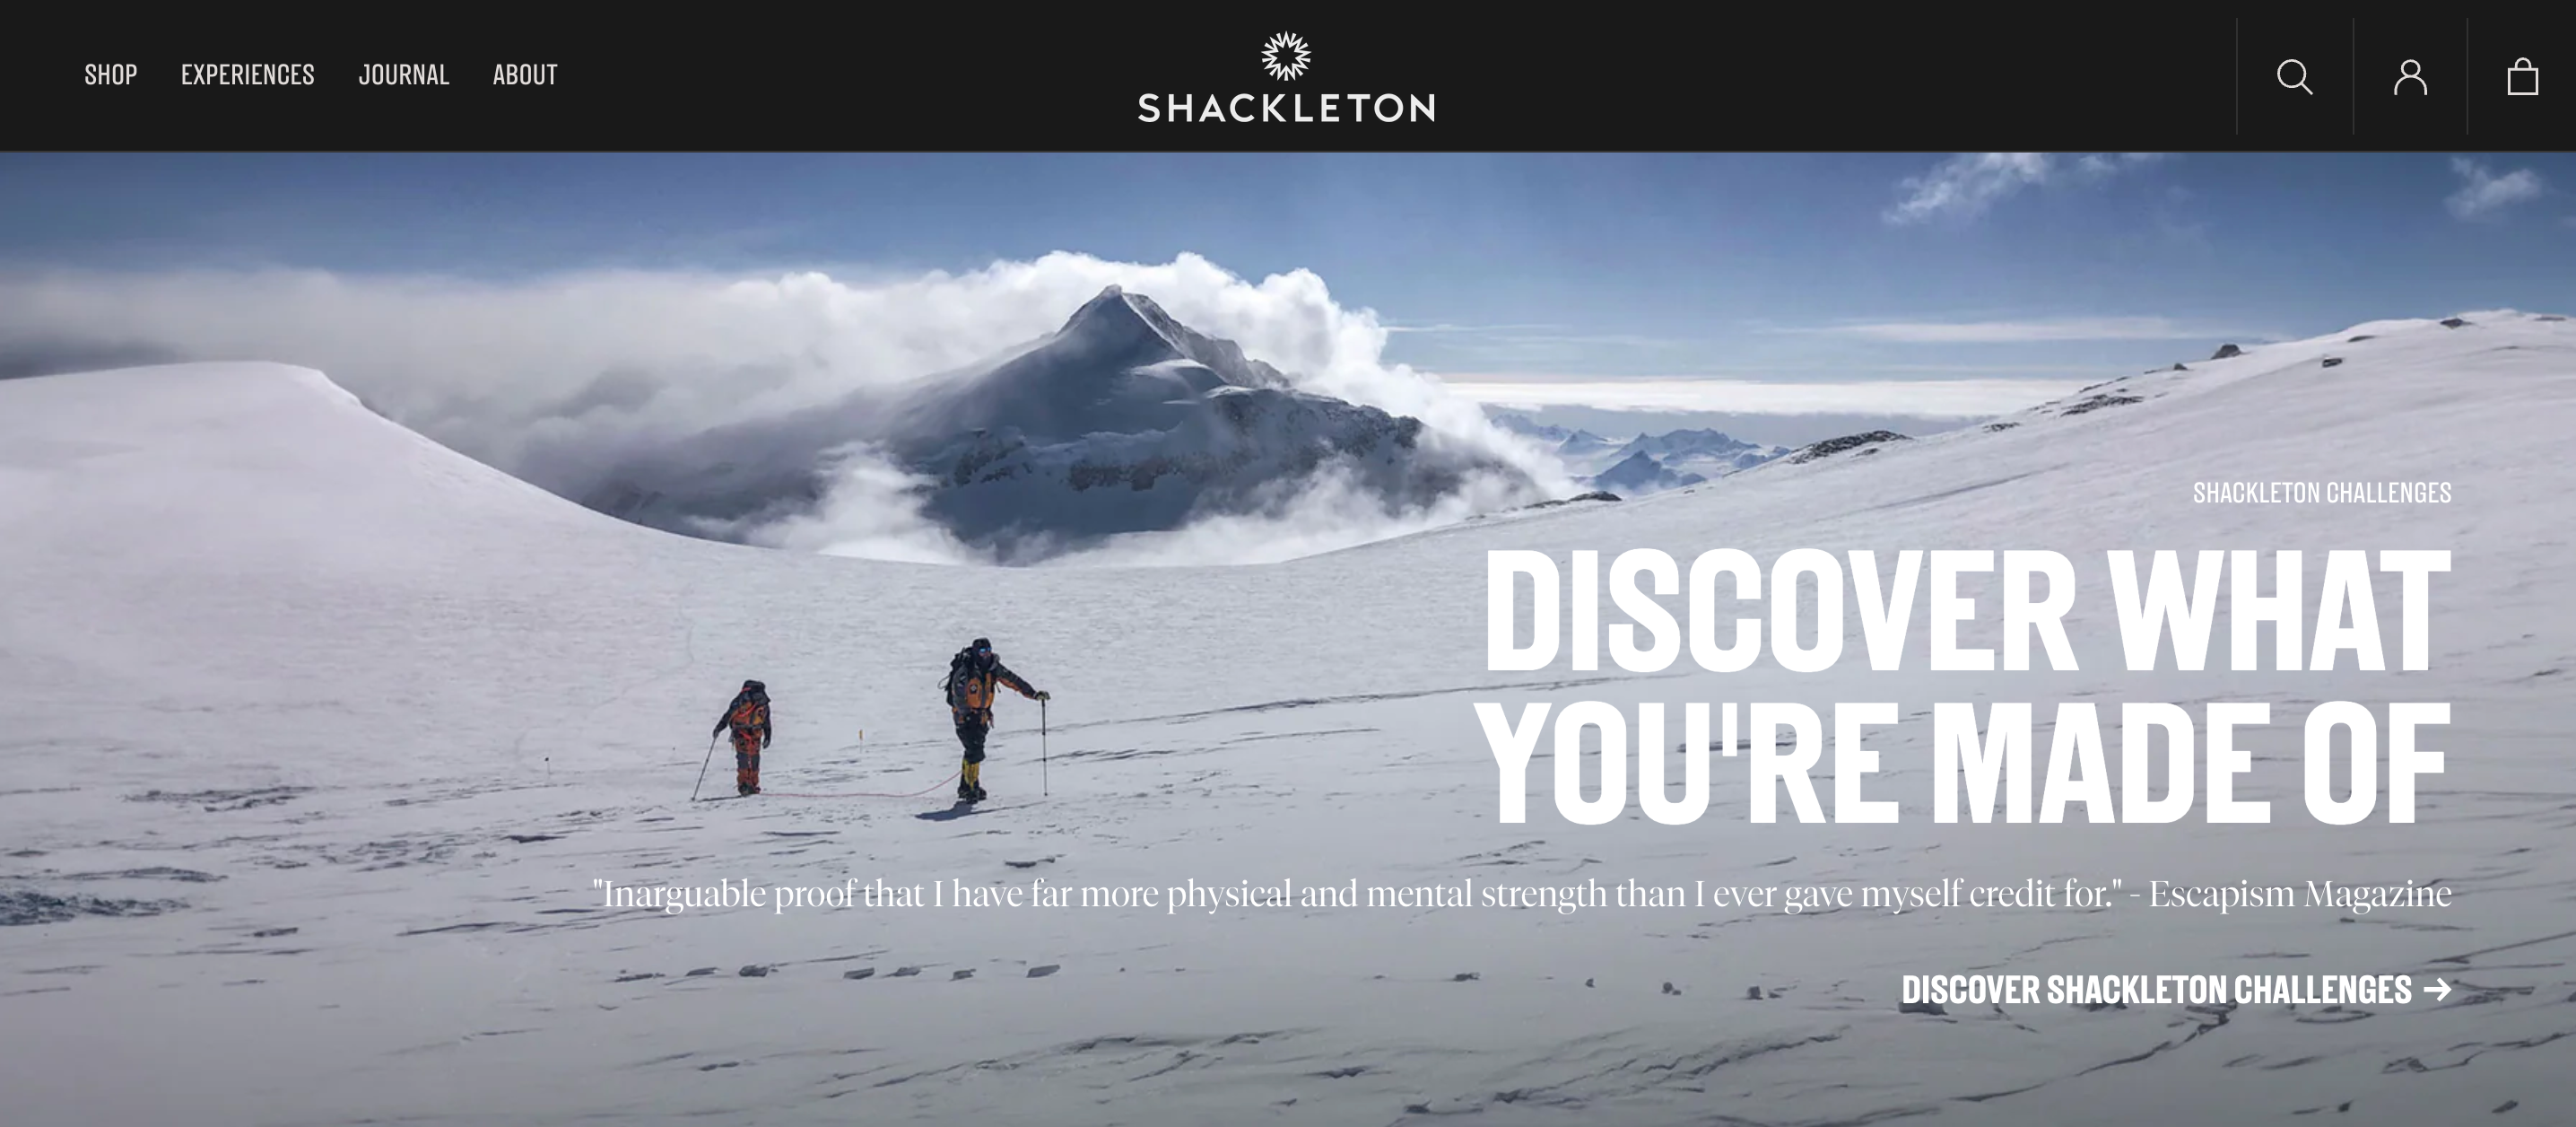 Shackleton homepage, above the fold.